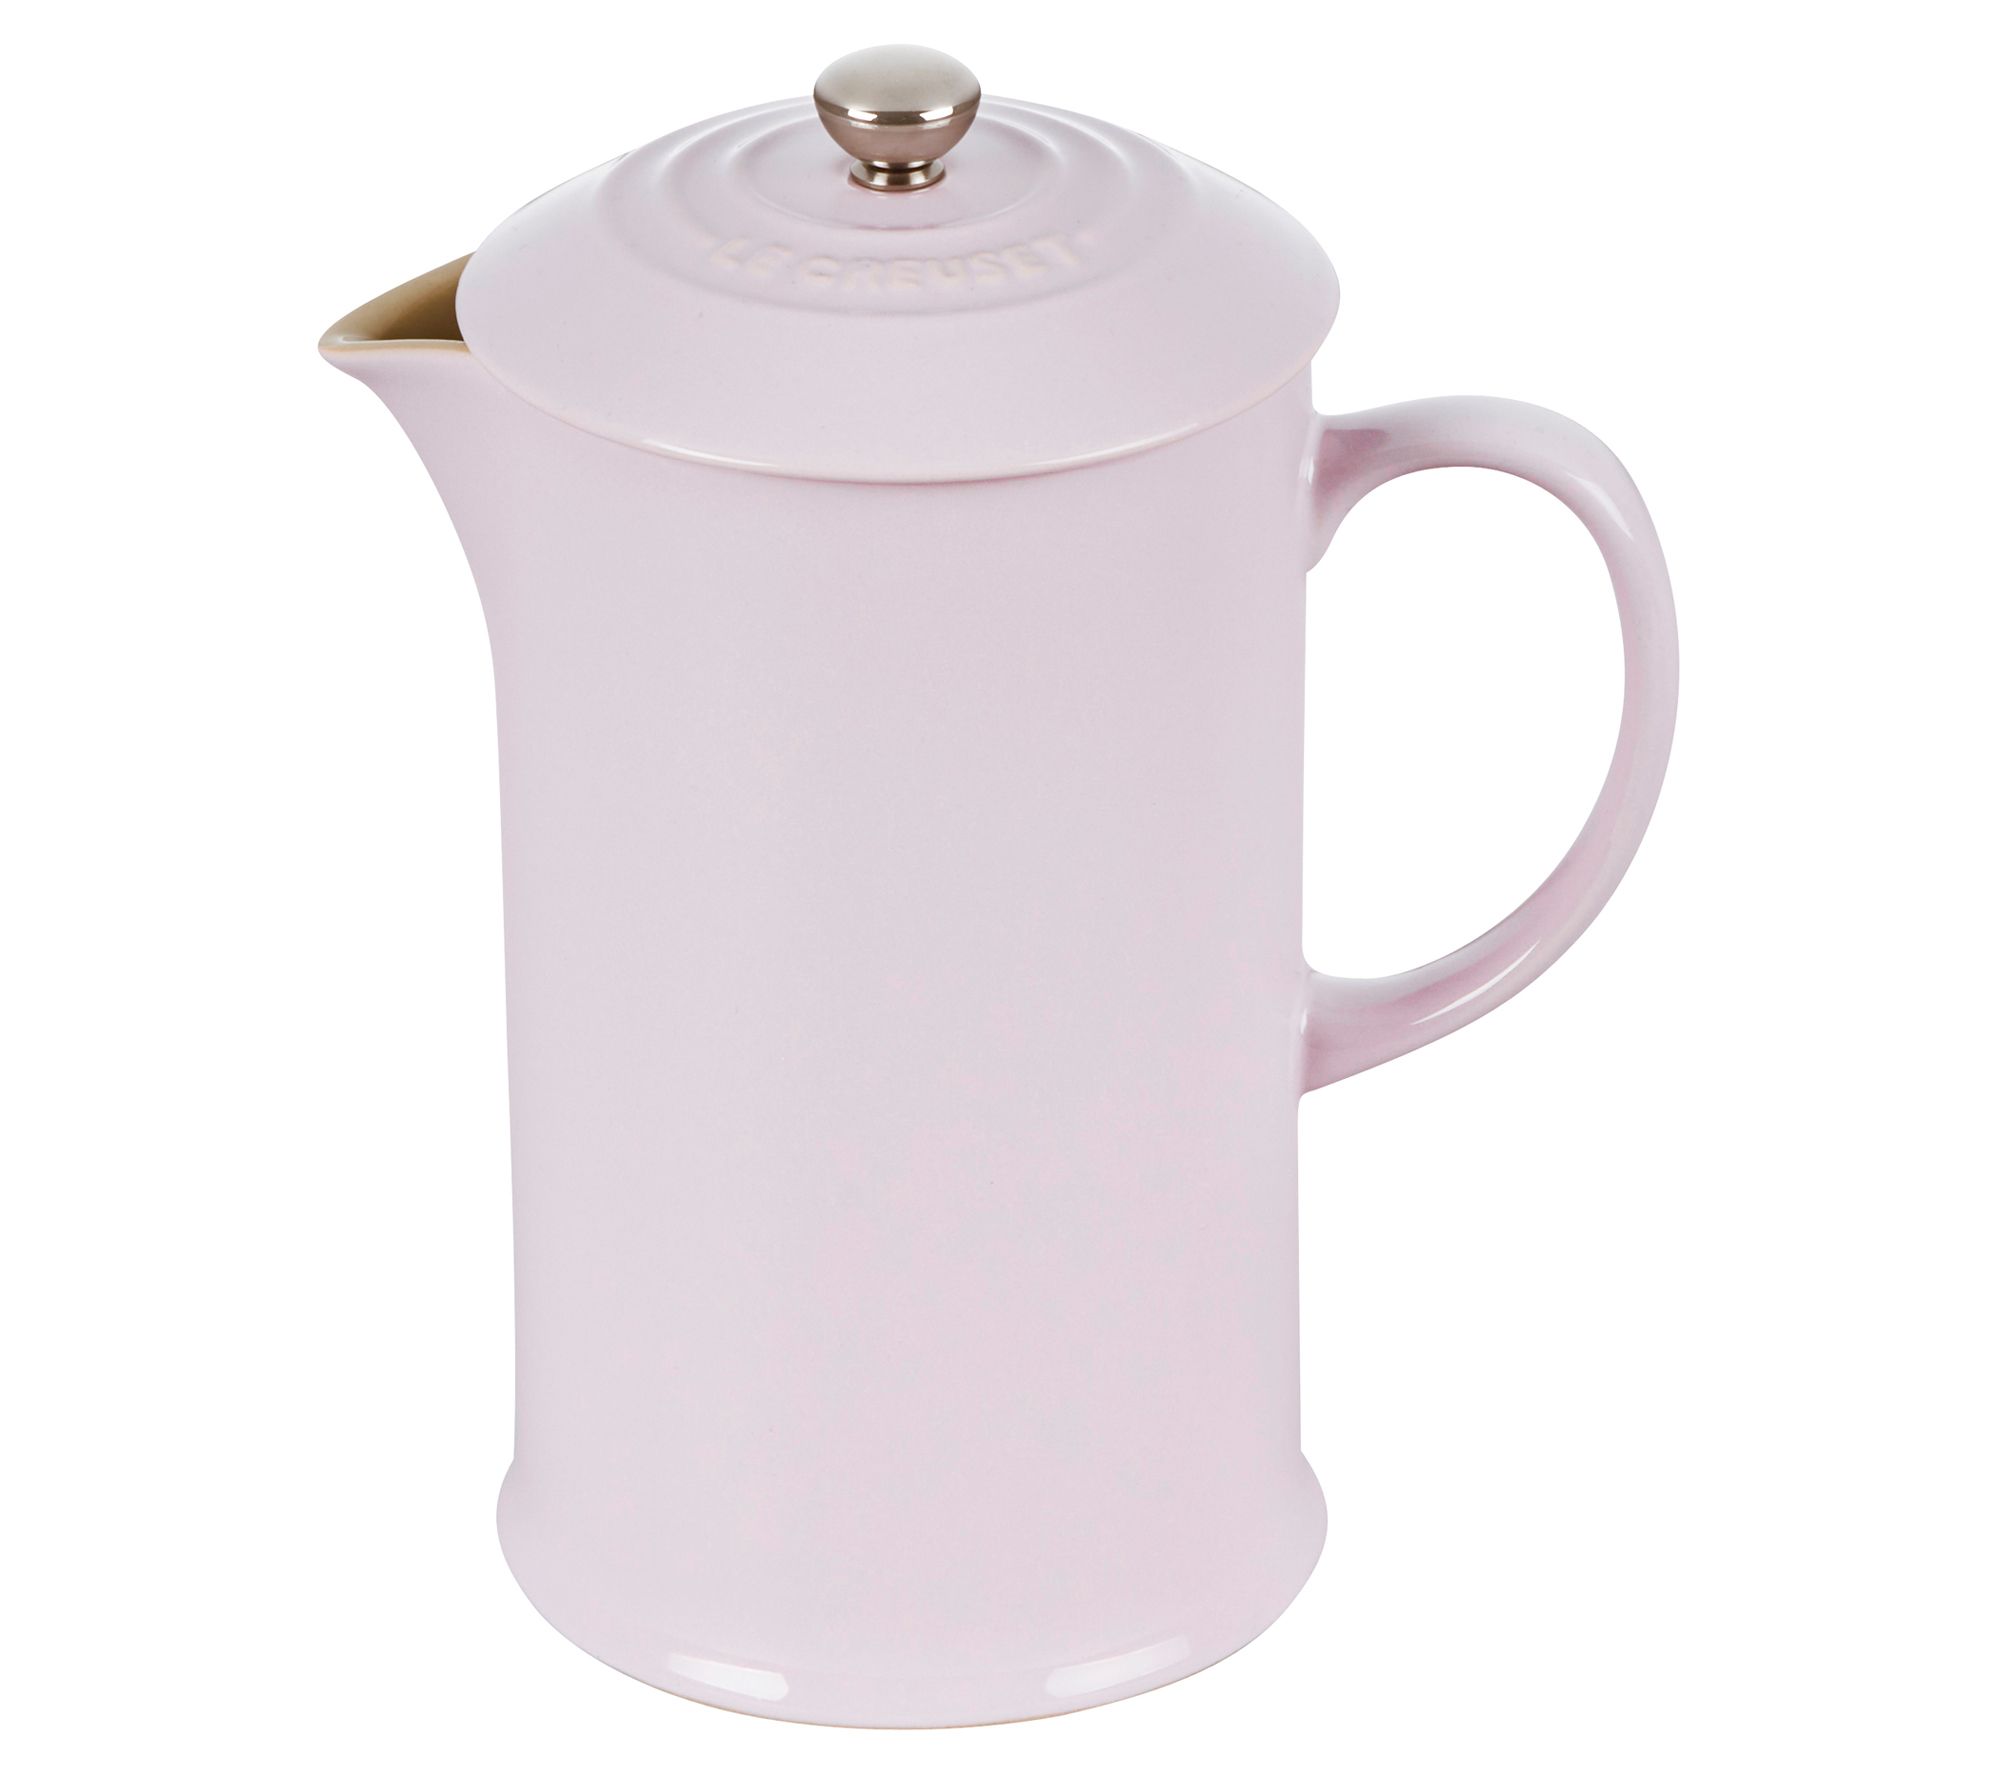 Le Creuset French Press 